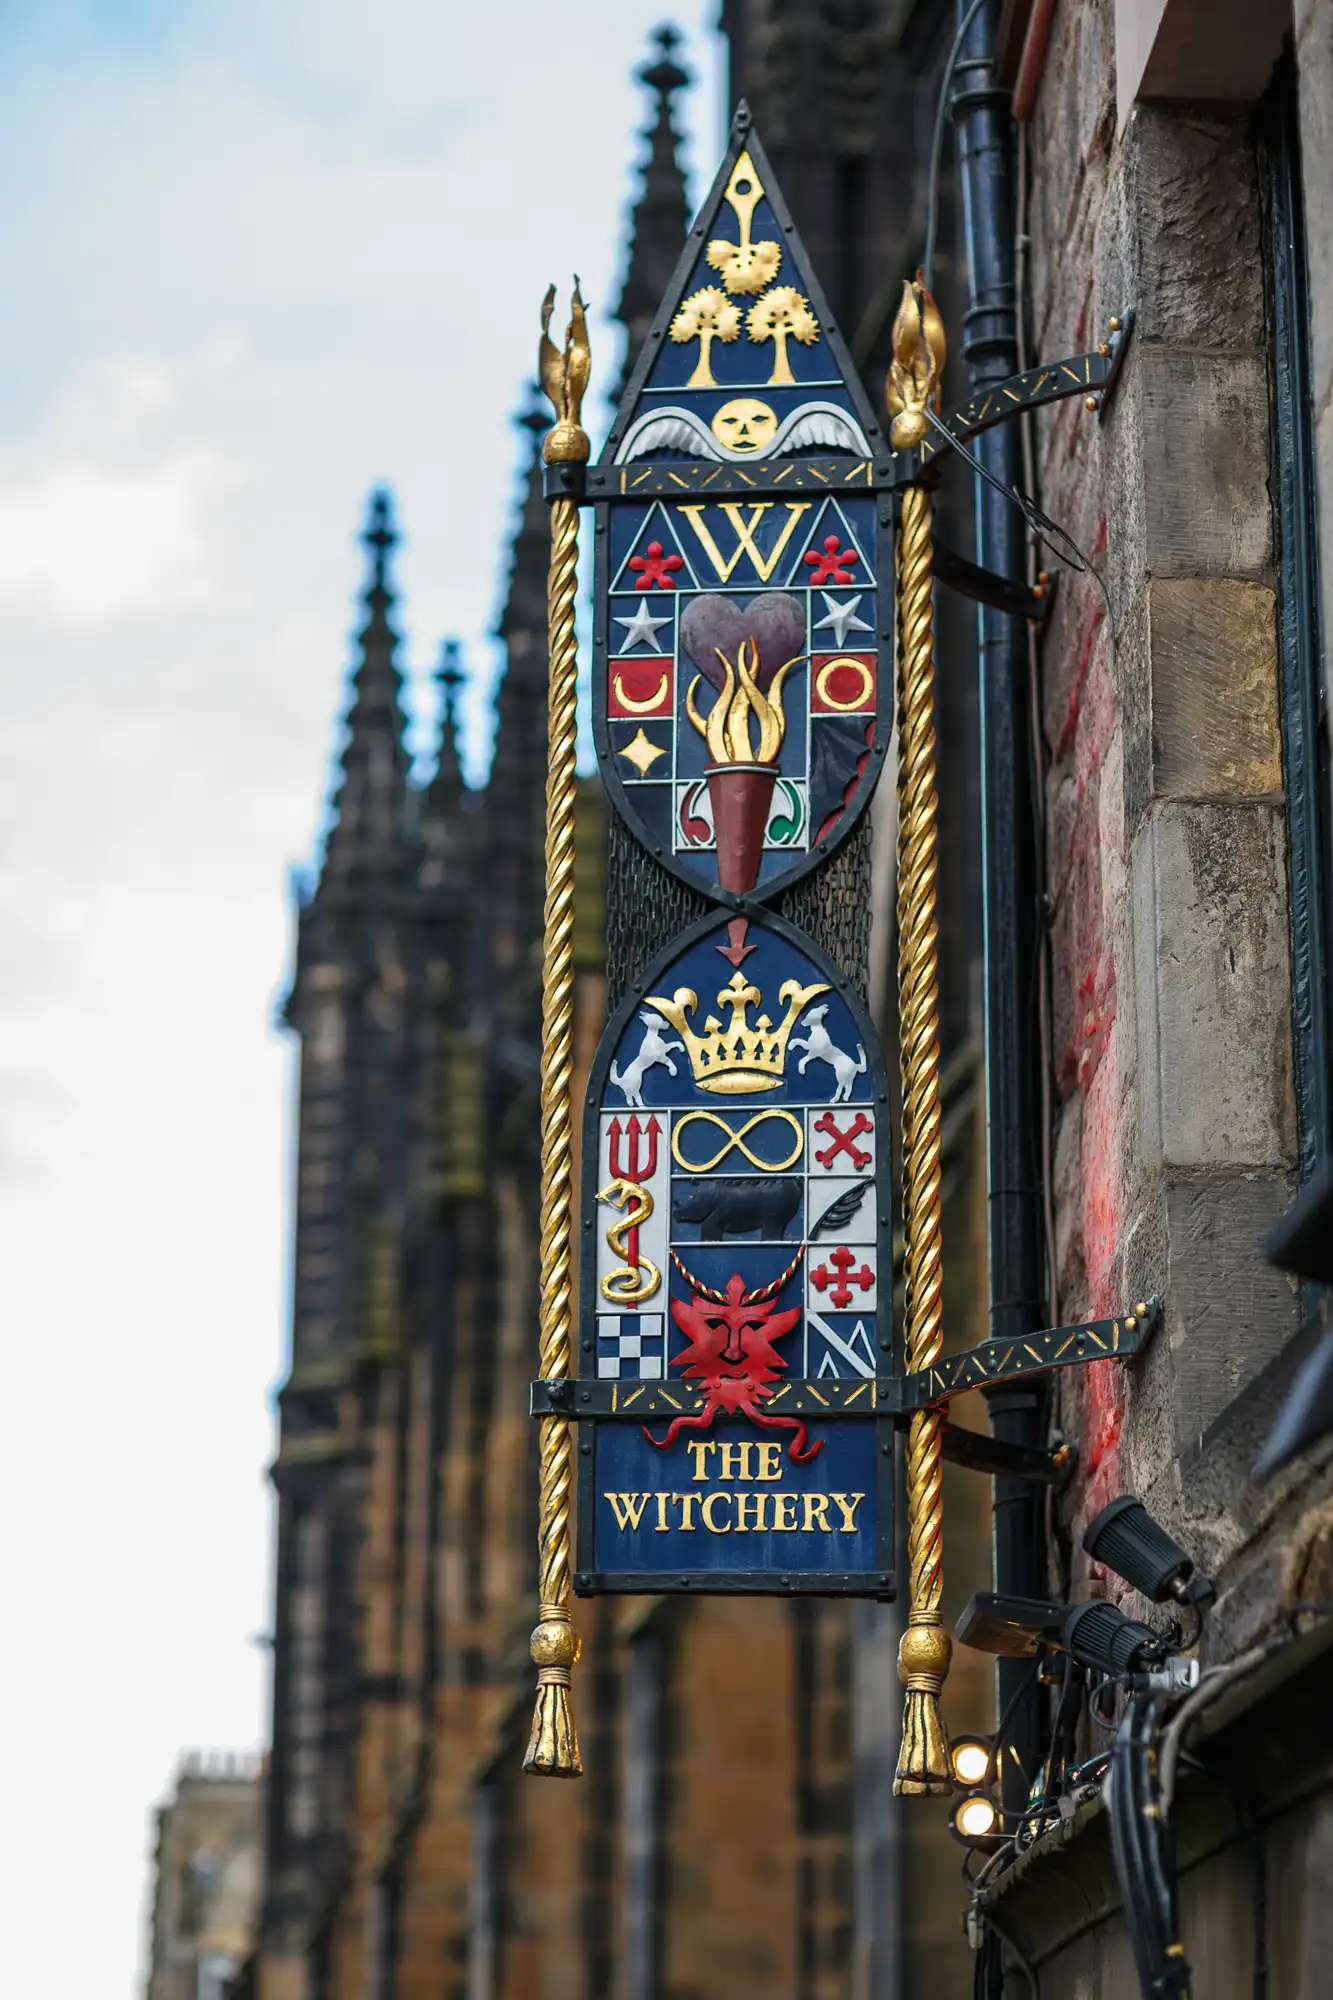 Ornate sign for "the witchery" featuring heraldic shields and symbols, with a gothic tower in the soft-focus background.